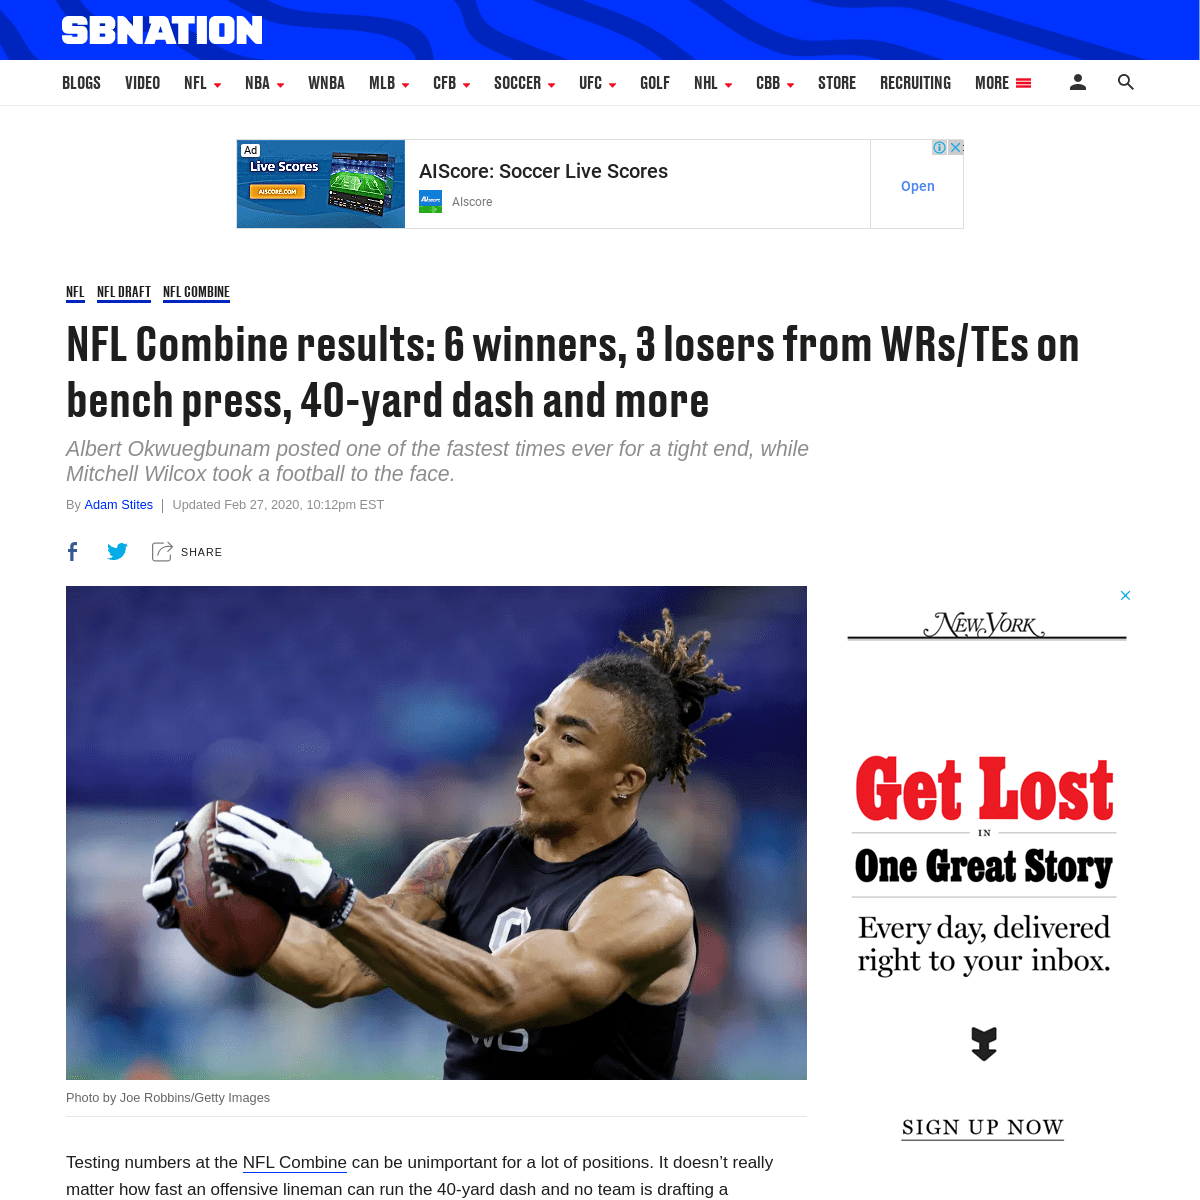 A complete backup of www.sbnation.com/nfl/2020/2/27/21156683/2020-nfl-combine-results-wide-receiver-tight-end